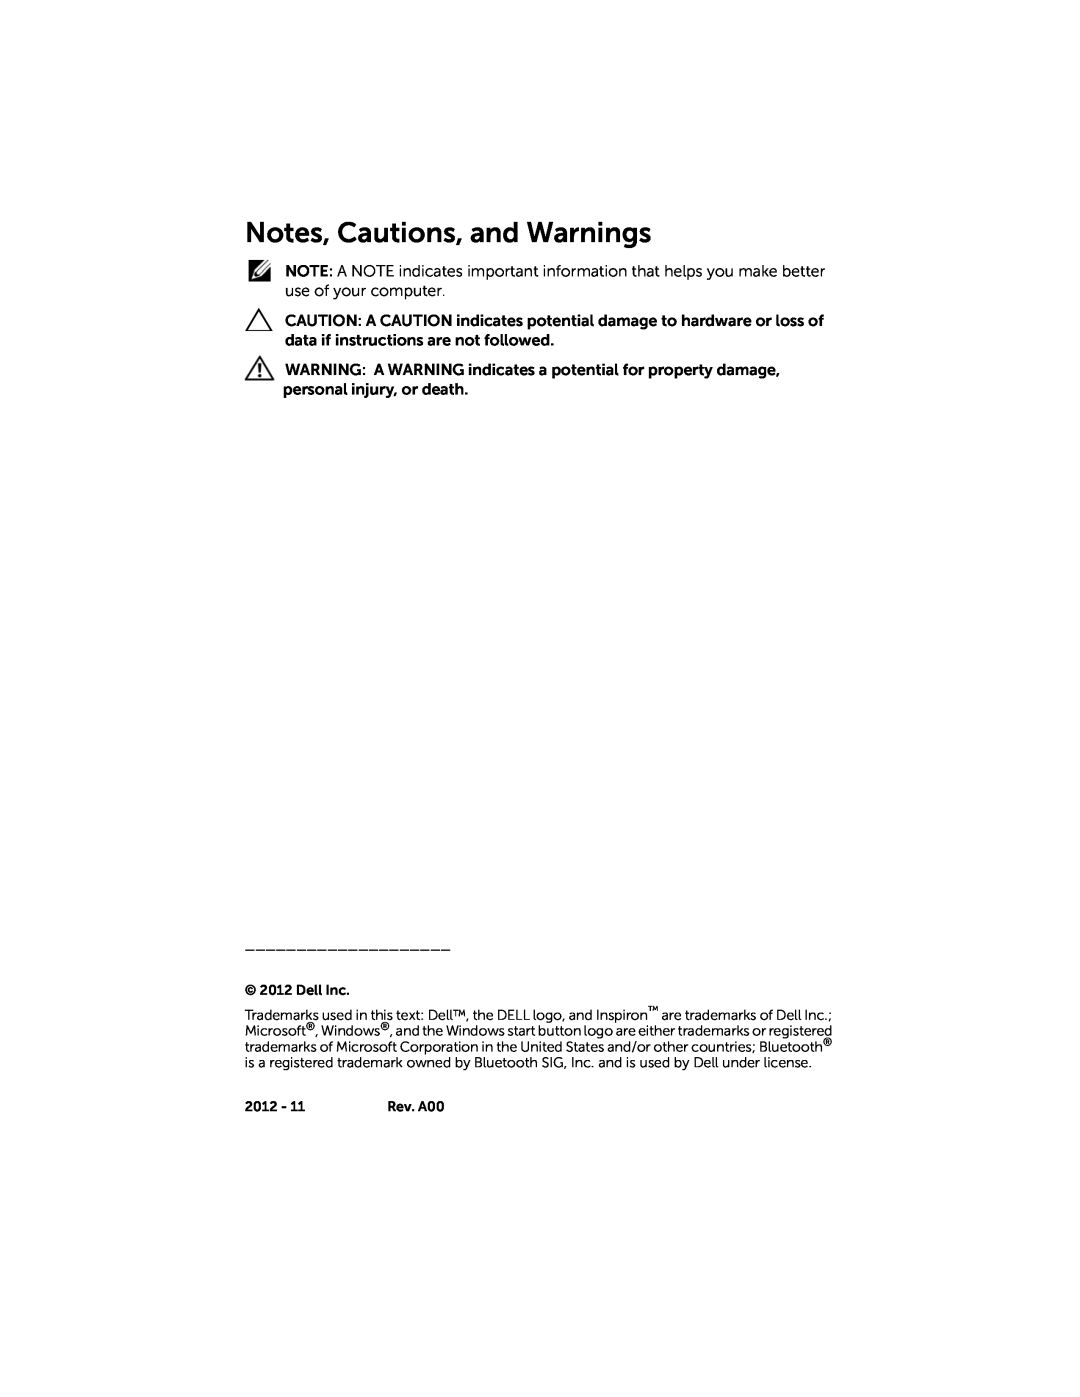 Dell 3521, 5521 manual Notes, Cautions, and Warnings, Dell Inc, 2012 